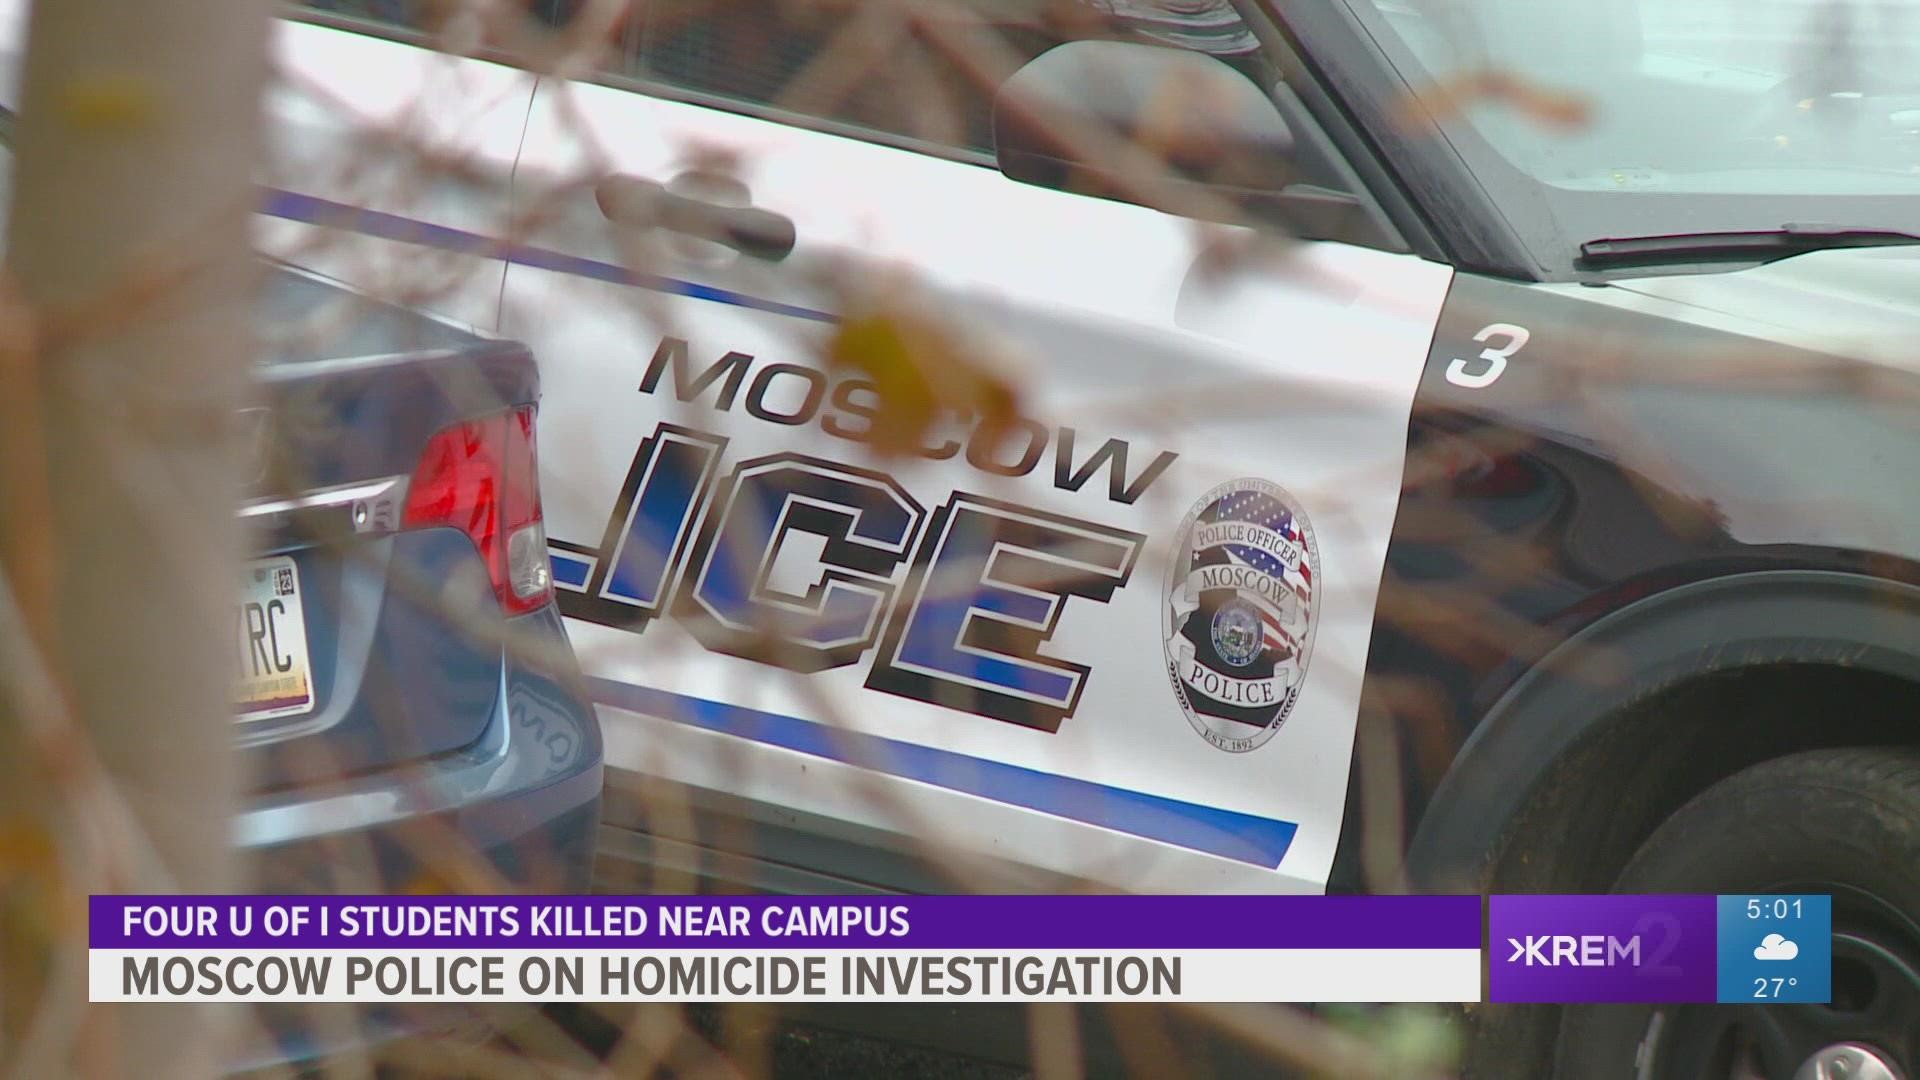 As the University of Idaho homicide investigation continues, new details emerged during a press conference held by the Moscow Police Department.